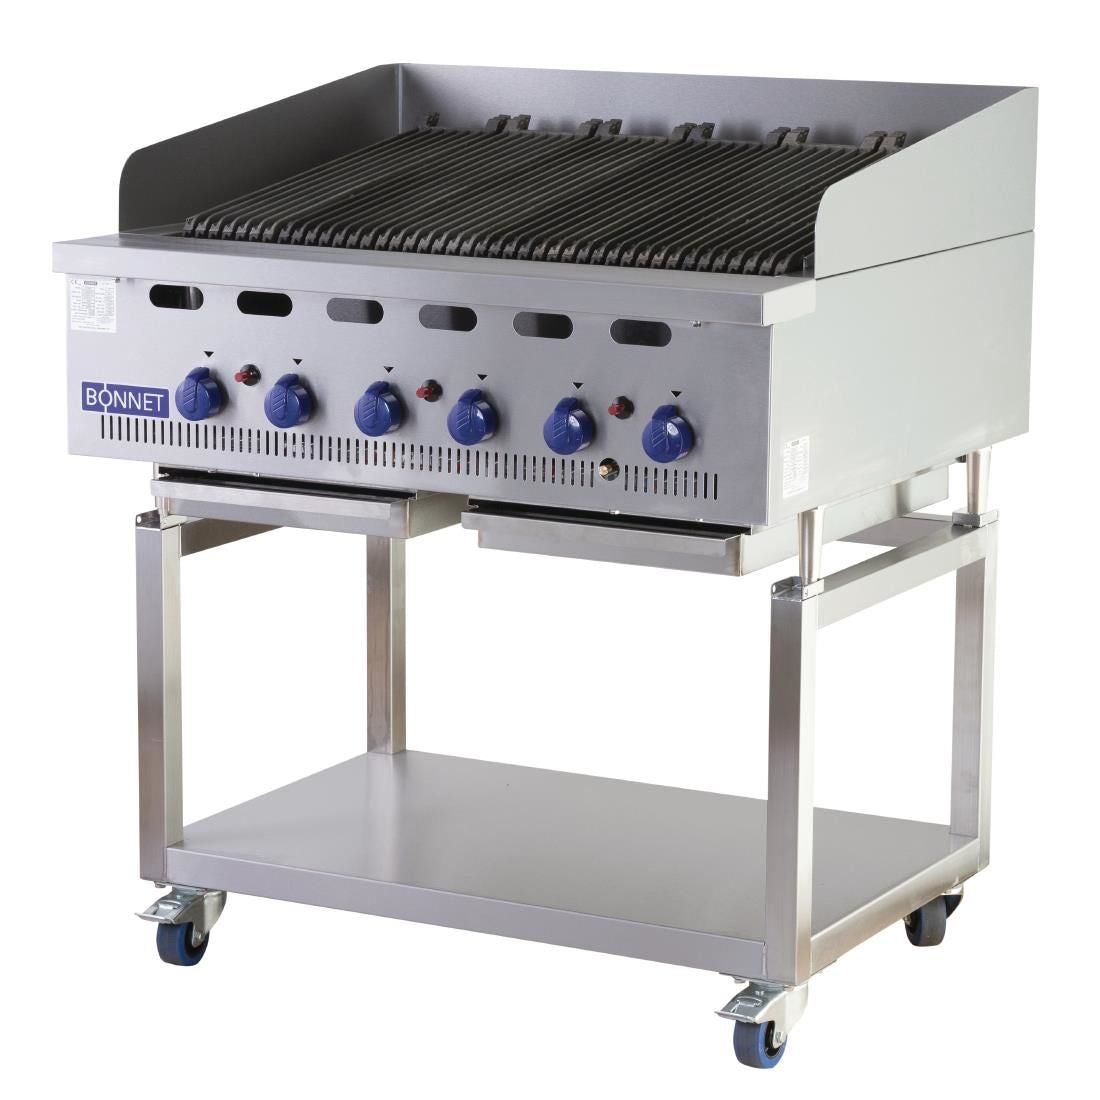 Hobart Bonnet Chargrill BCB900 Natural Gas JD Catering Equipment Solutions Ltd